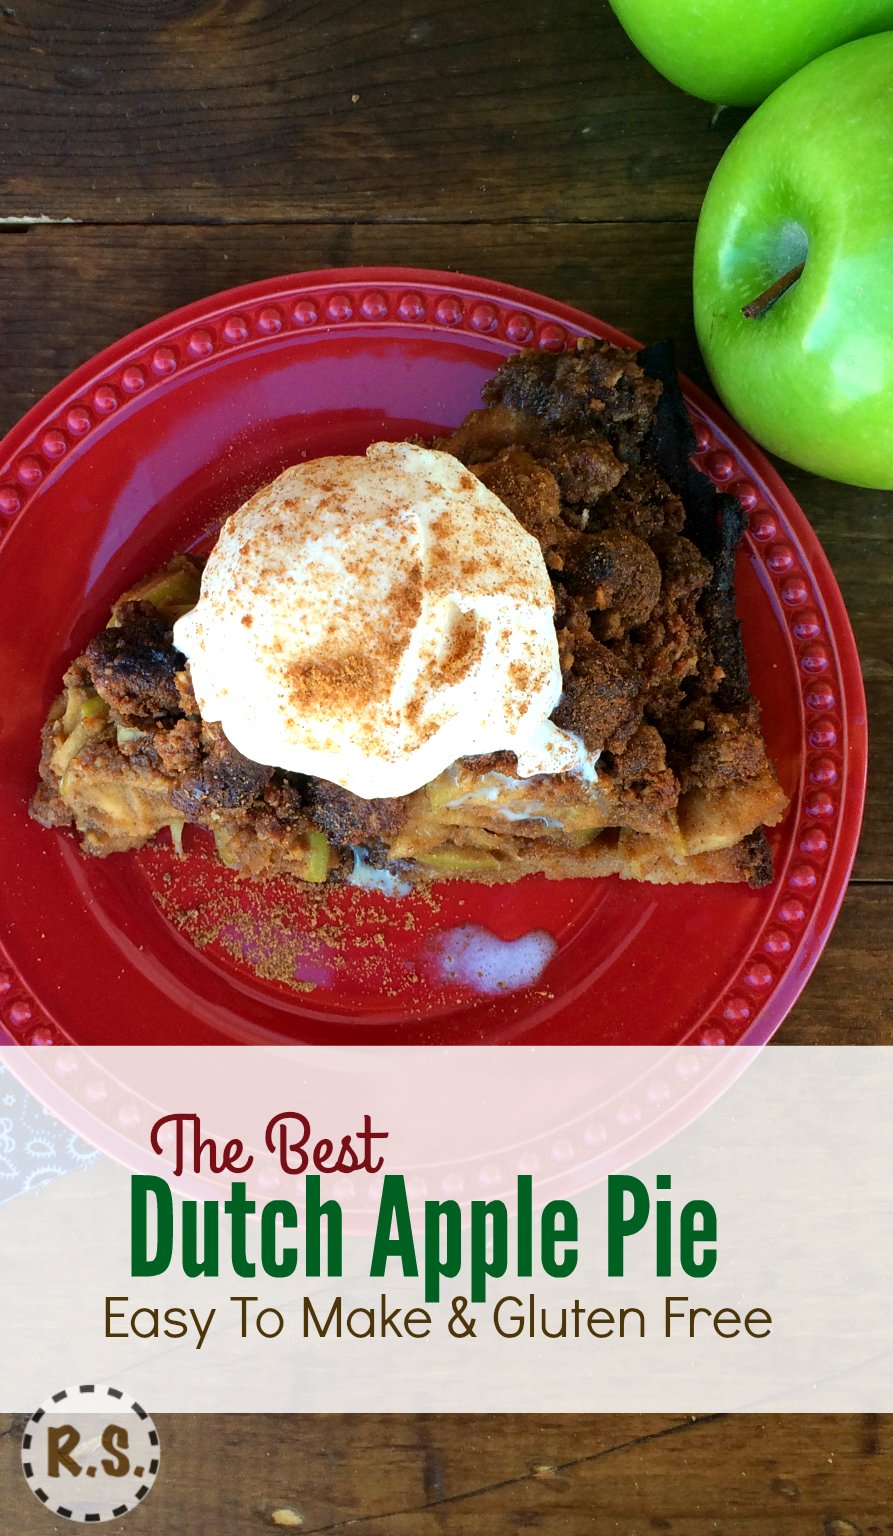 Savor the rich flavors in this dutch apple pie. The warm apple filling, to its rich crumble topping. Every bite of this pie will make you see how healthy and gluten free tastes the best!